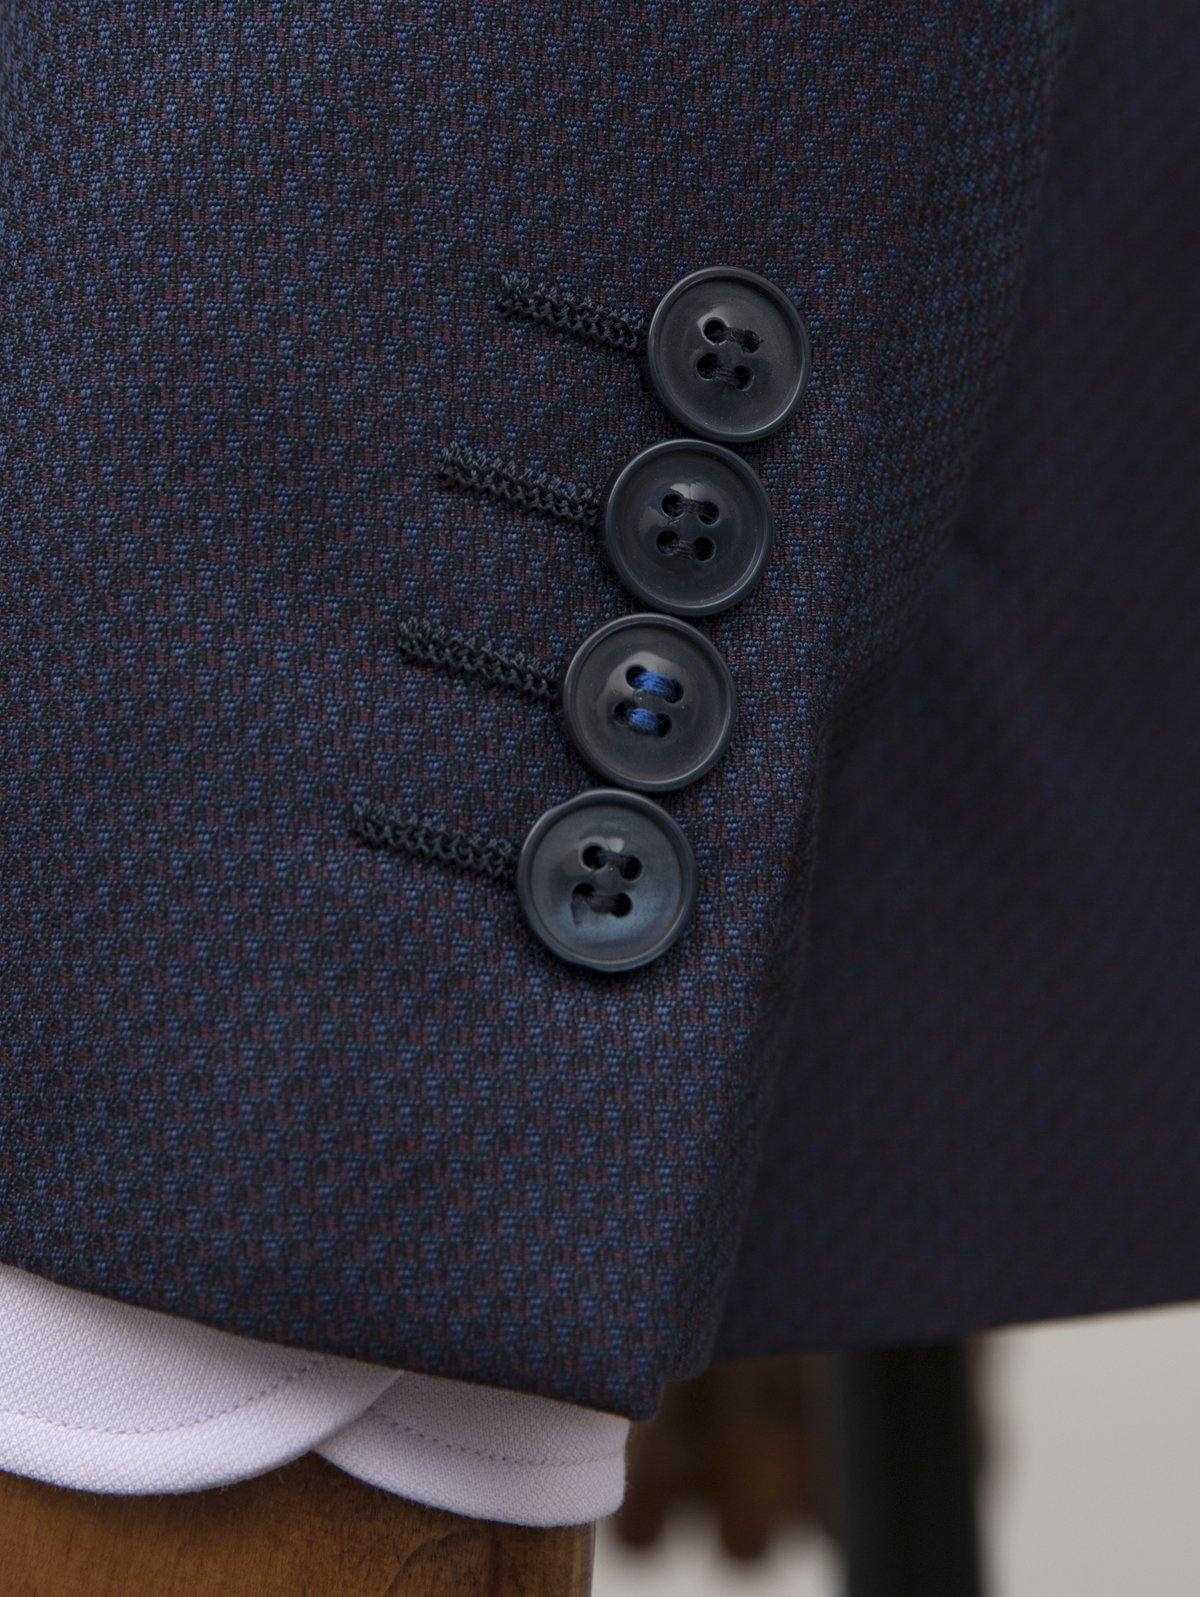 3 PIECE SUIT NAVY BLUE at Charcoal Clothing